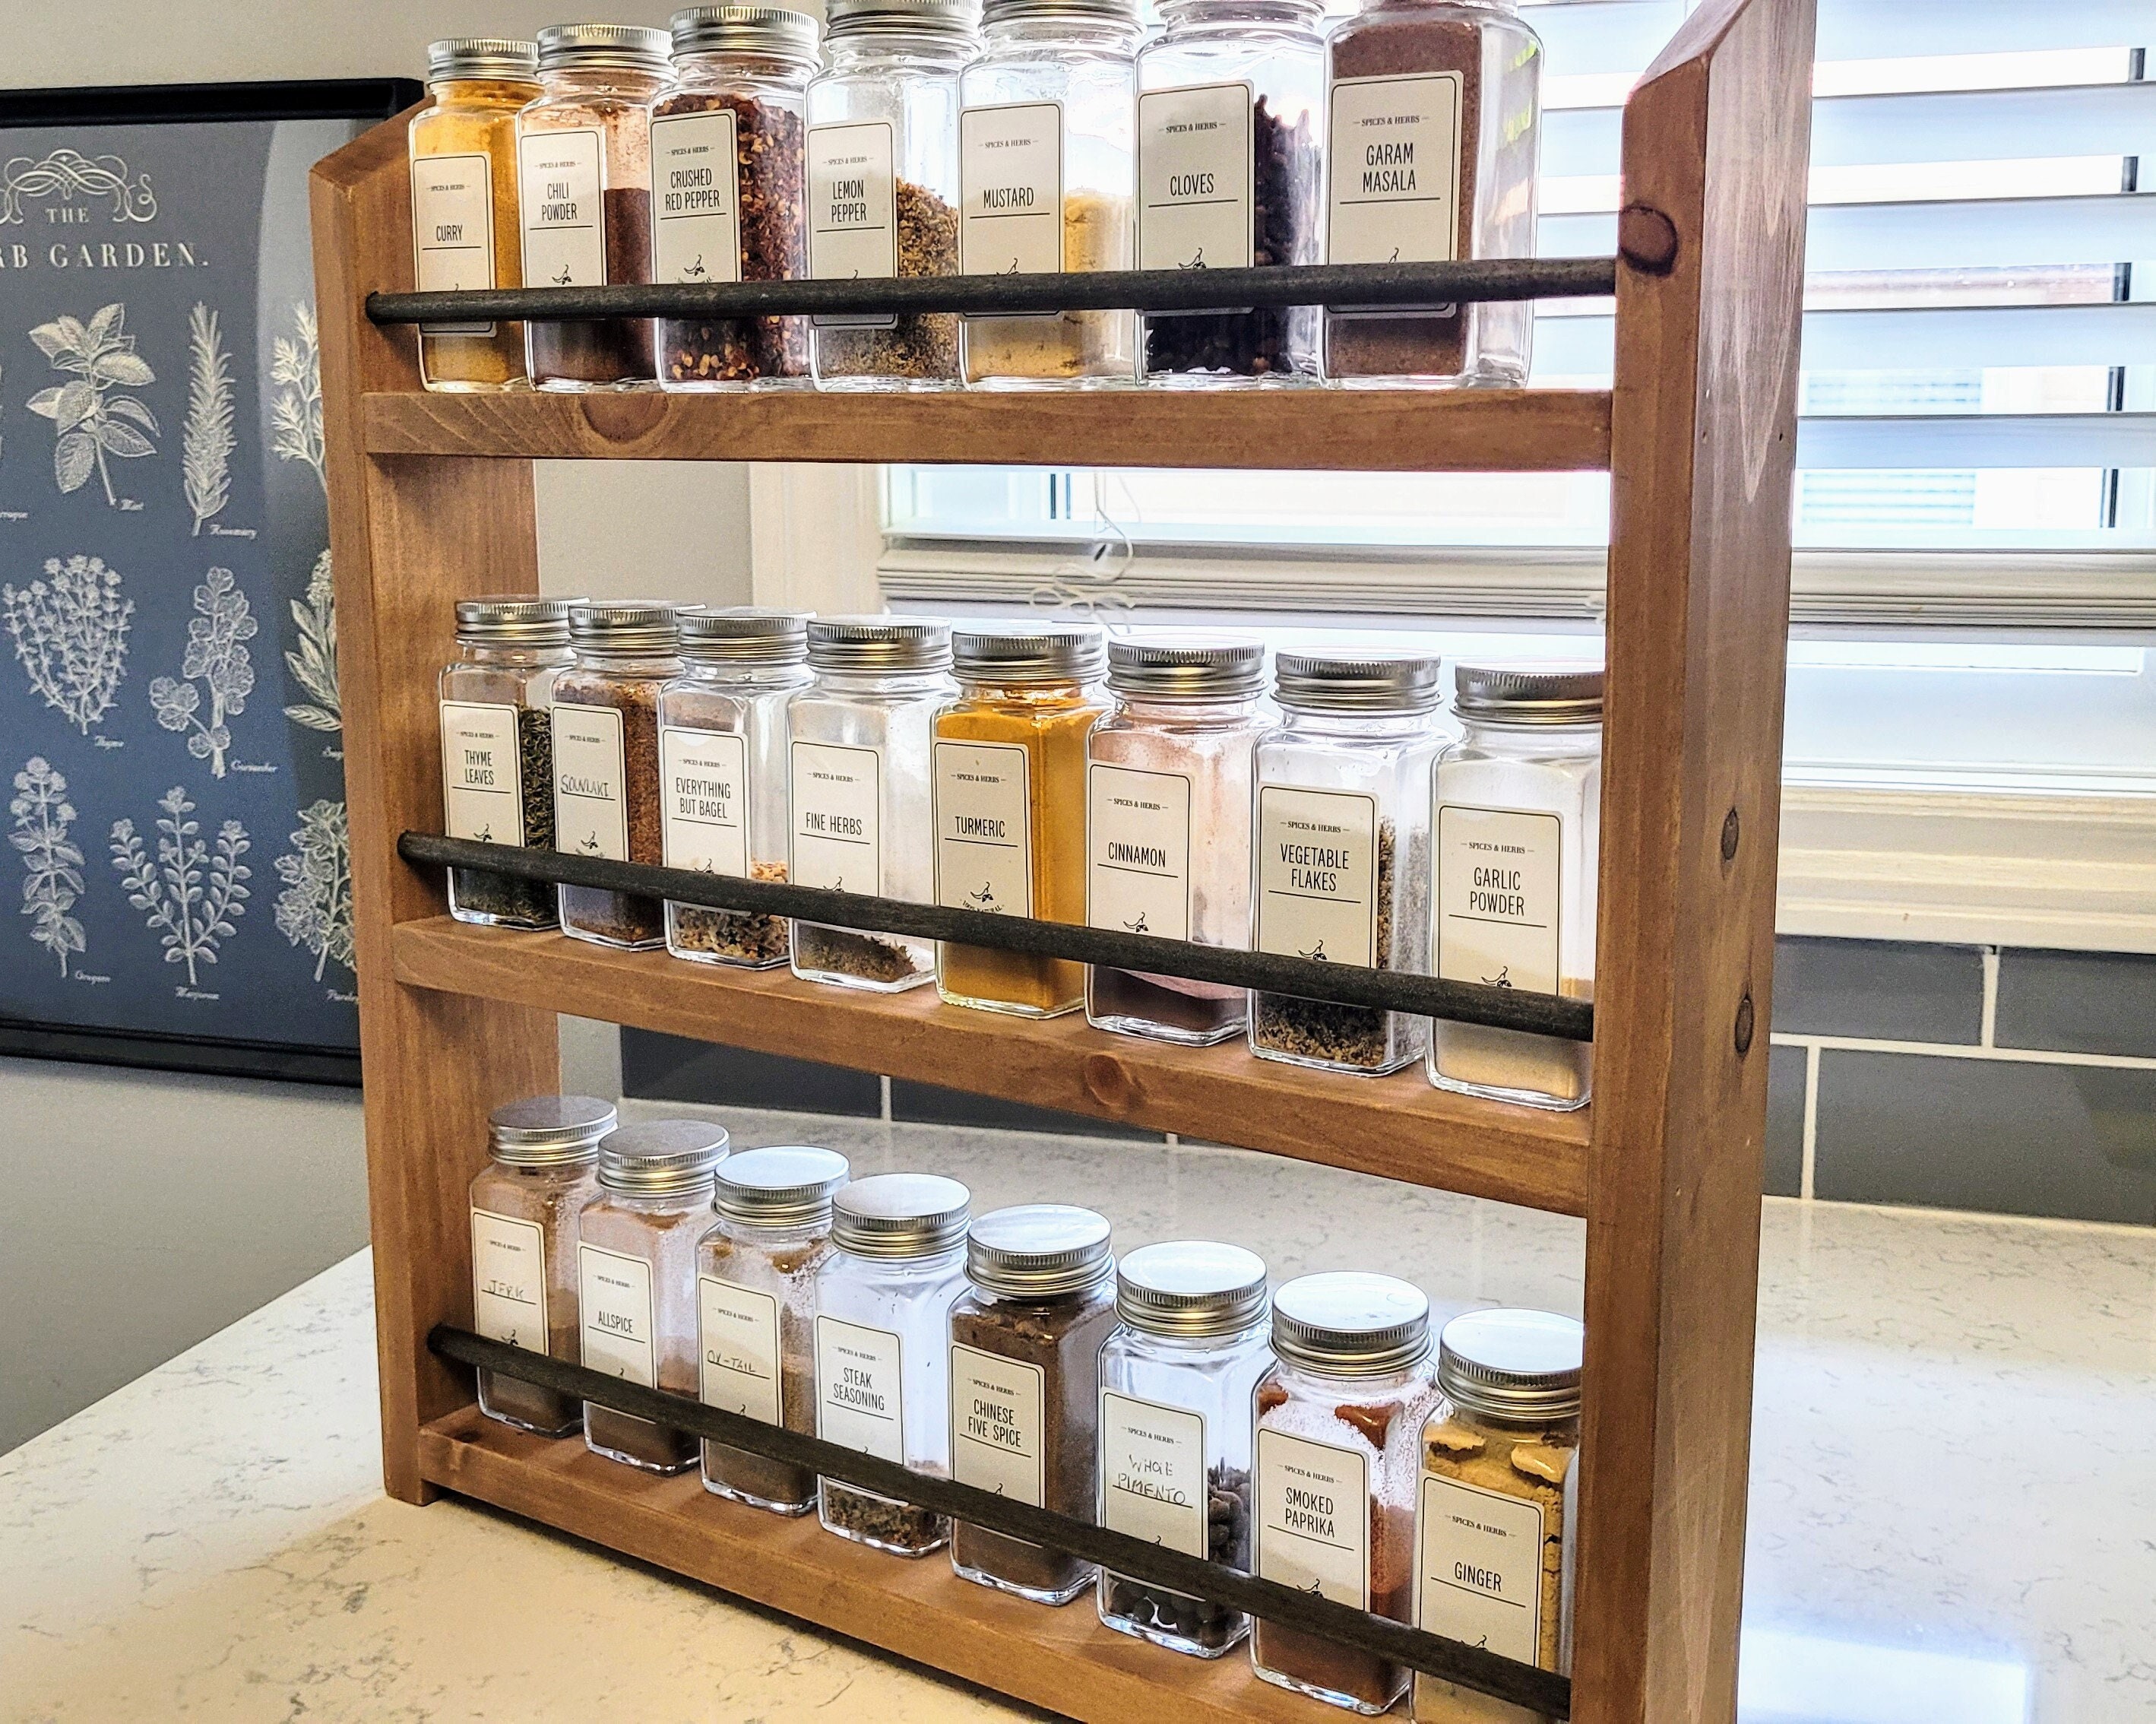 Spice Jar Rack - 12 Durable Glass Jars in Sleek & Attractive Carousel -  Belwares - Decorate Your Home with Joy!